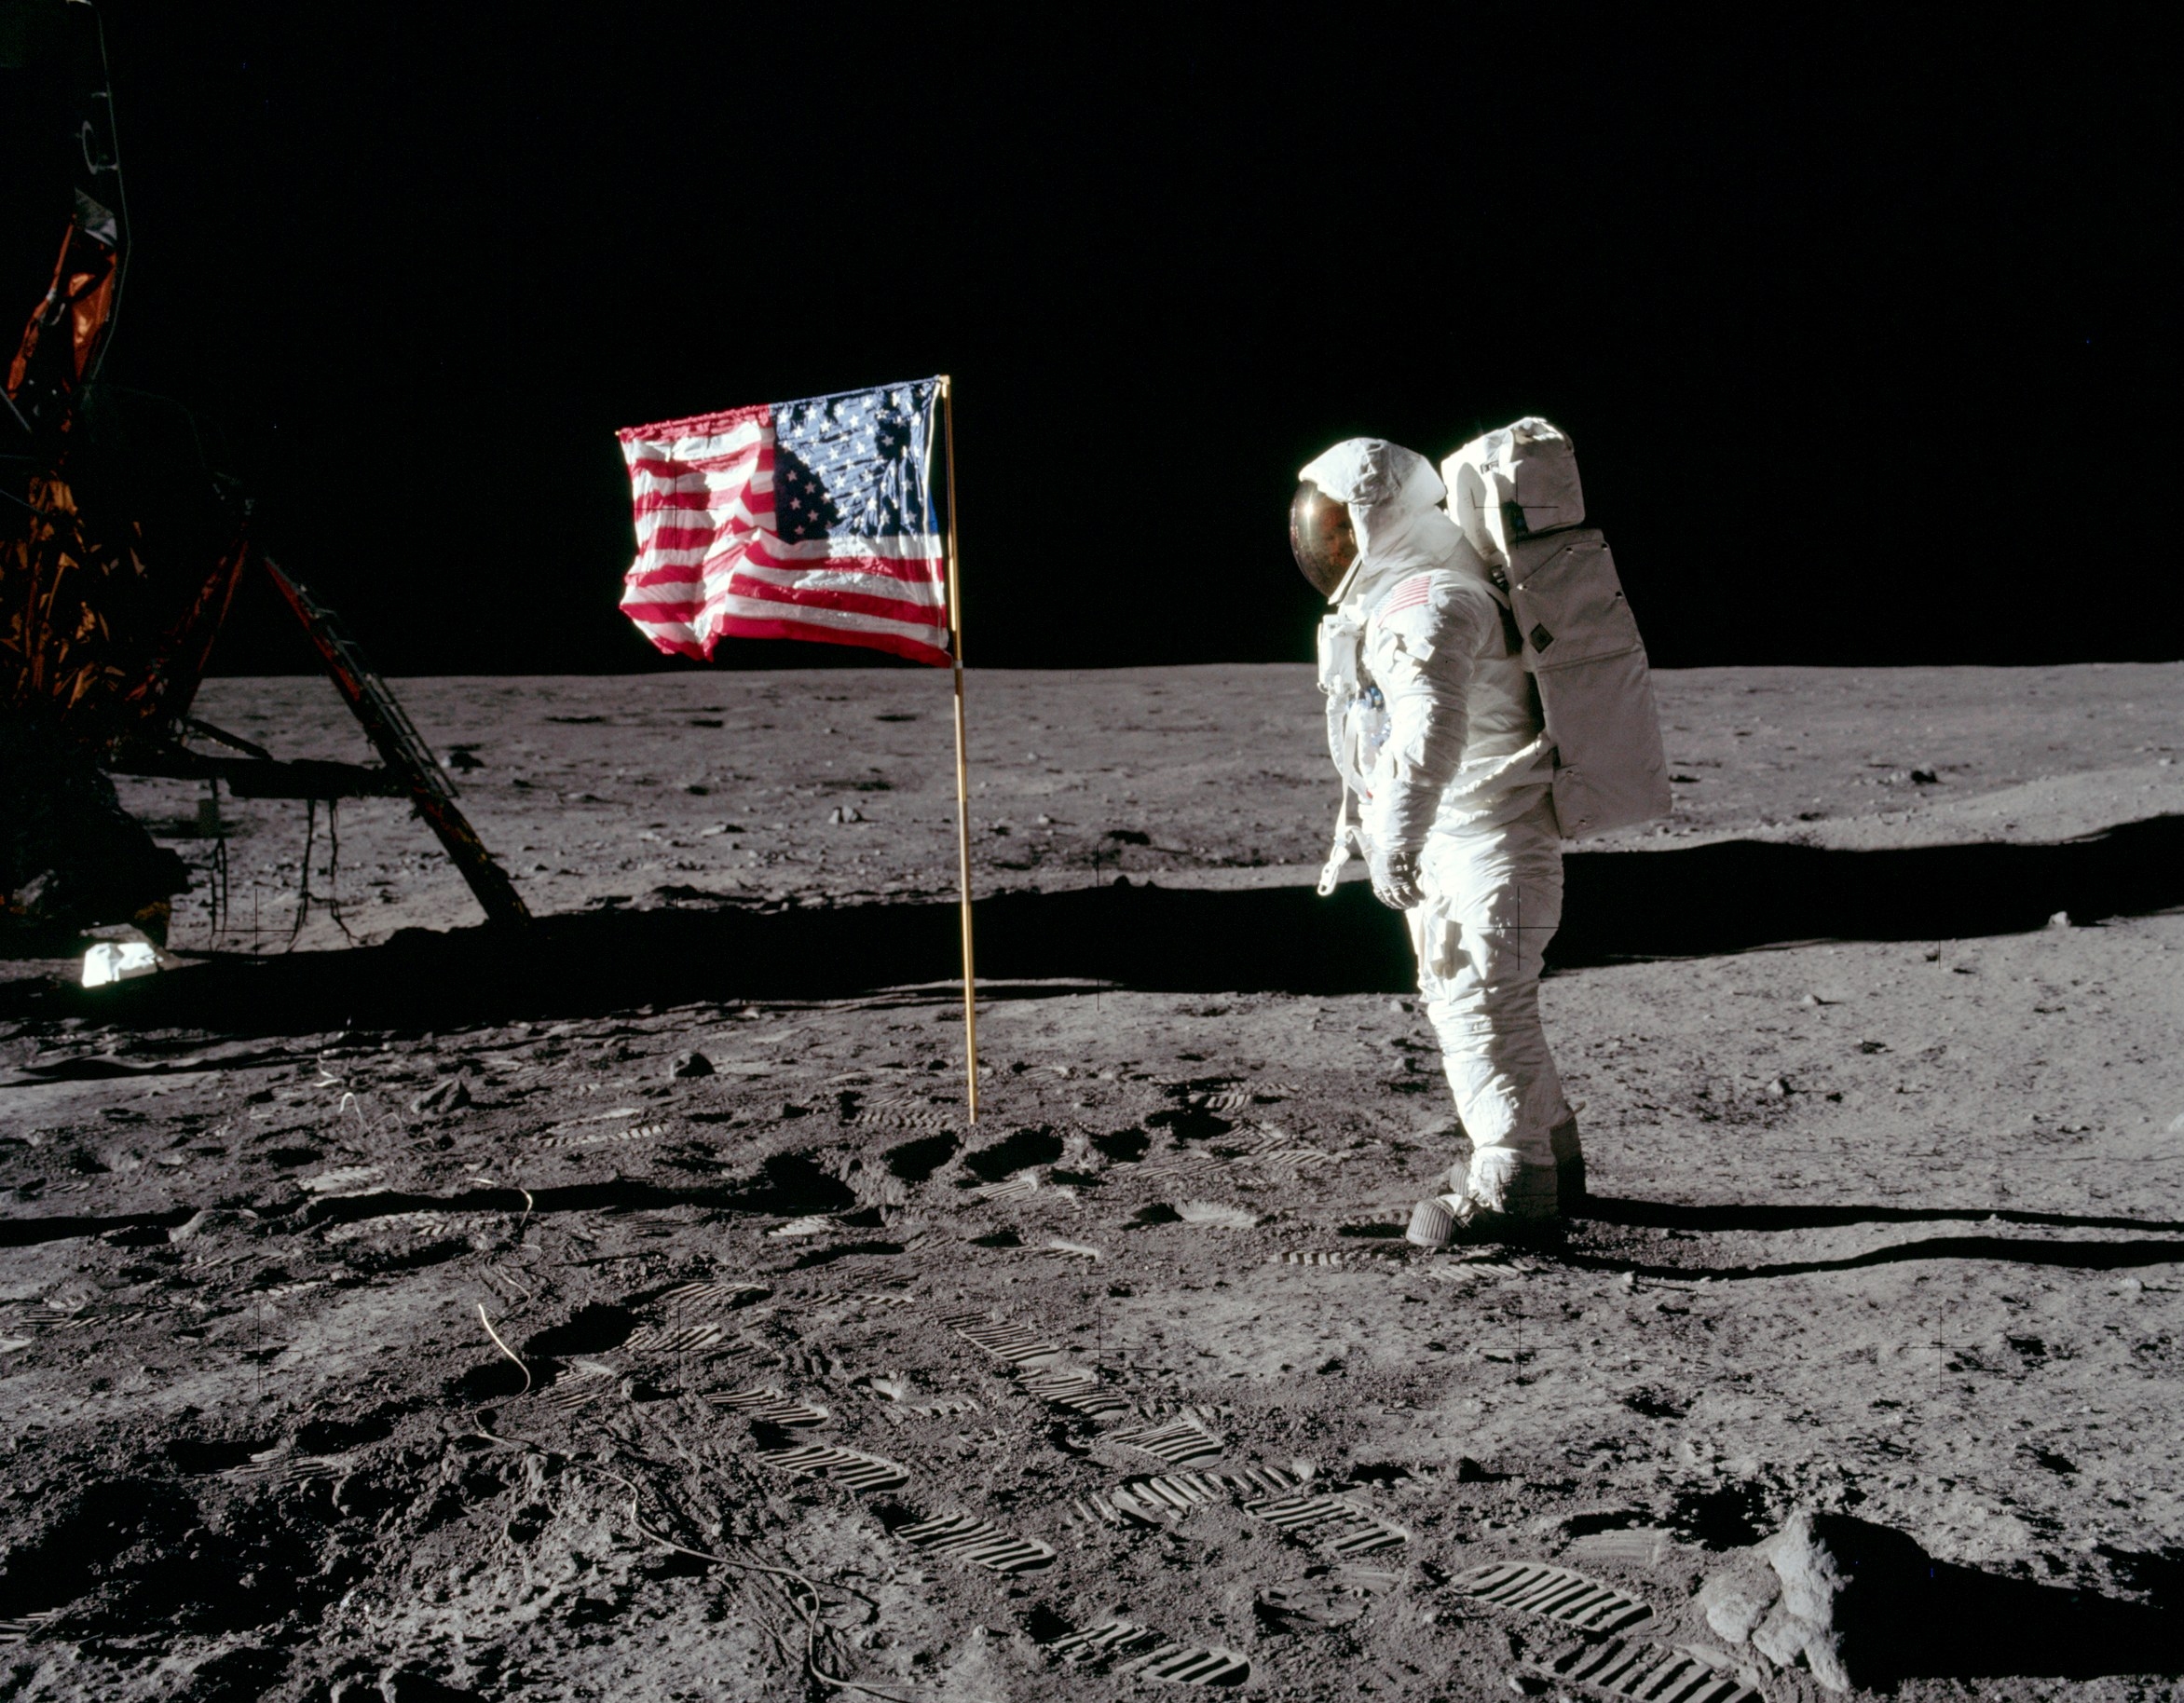 A human on the Moon on July 20, 1969 (Photo by NASA)